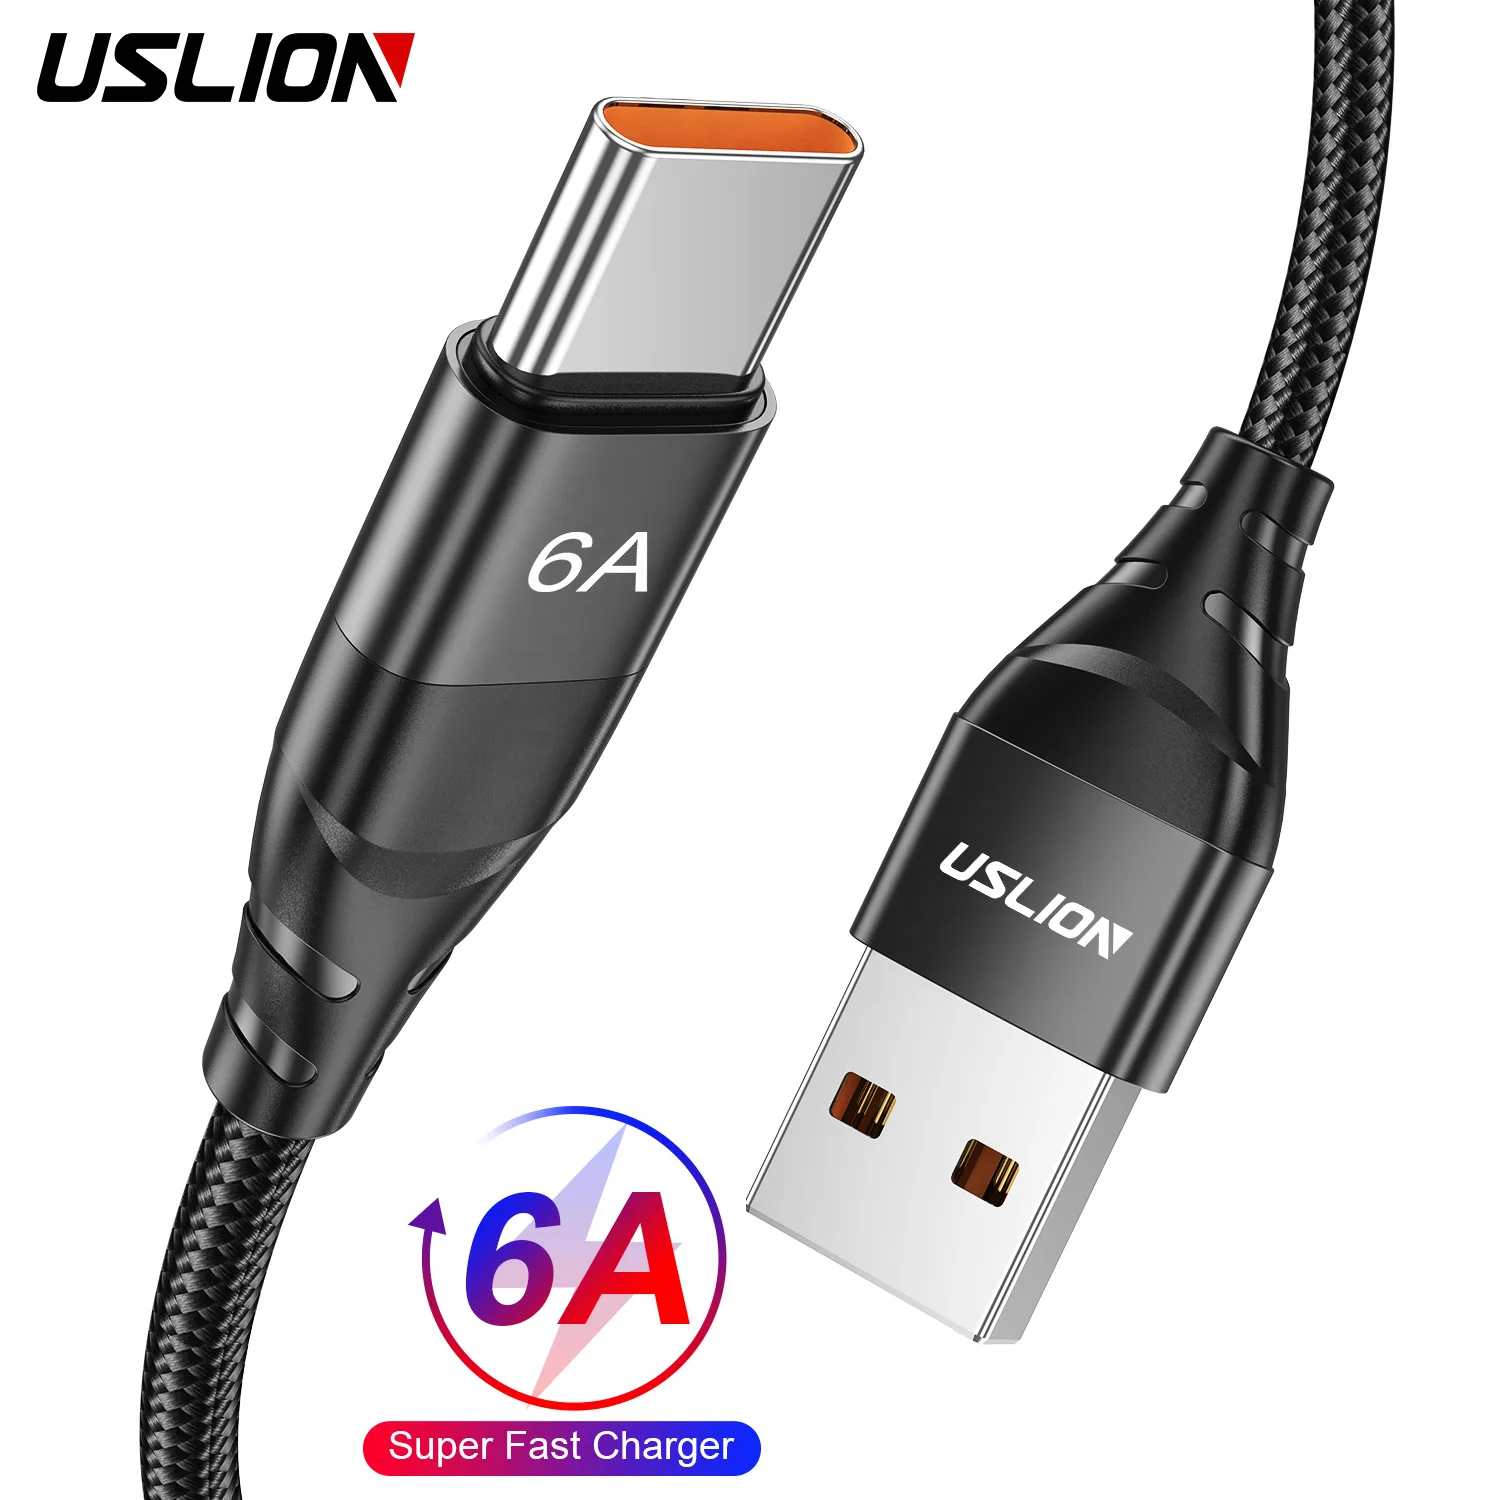 

USLION 6A 66W Super Quick Charging USB Type C Cable Charger Mobile Phone 5A 3A USB Cable Type C Data Cables Micro USB for Huawei, Black,red,purple